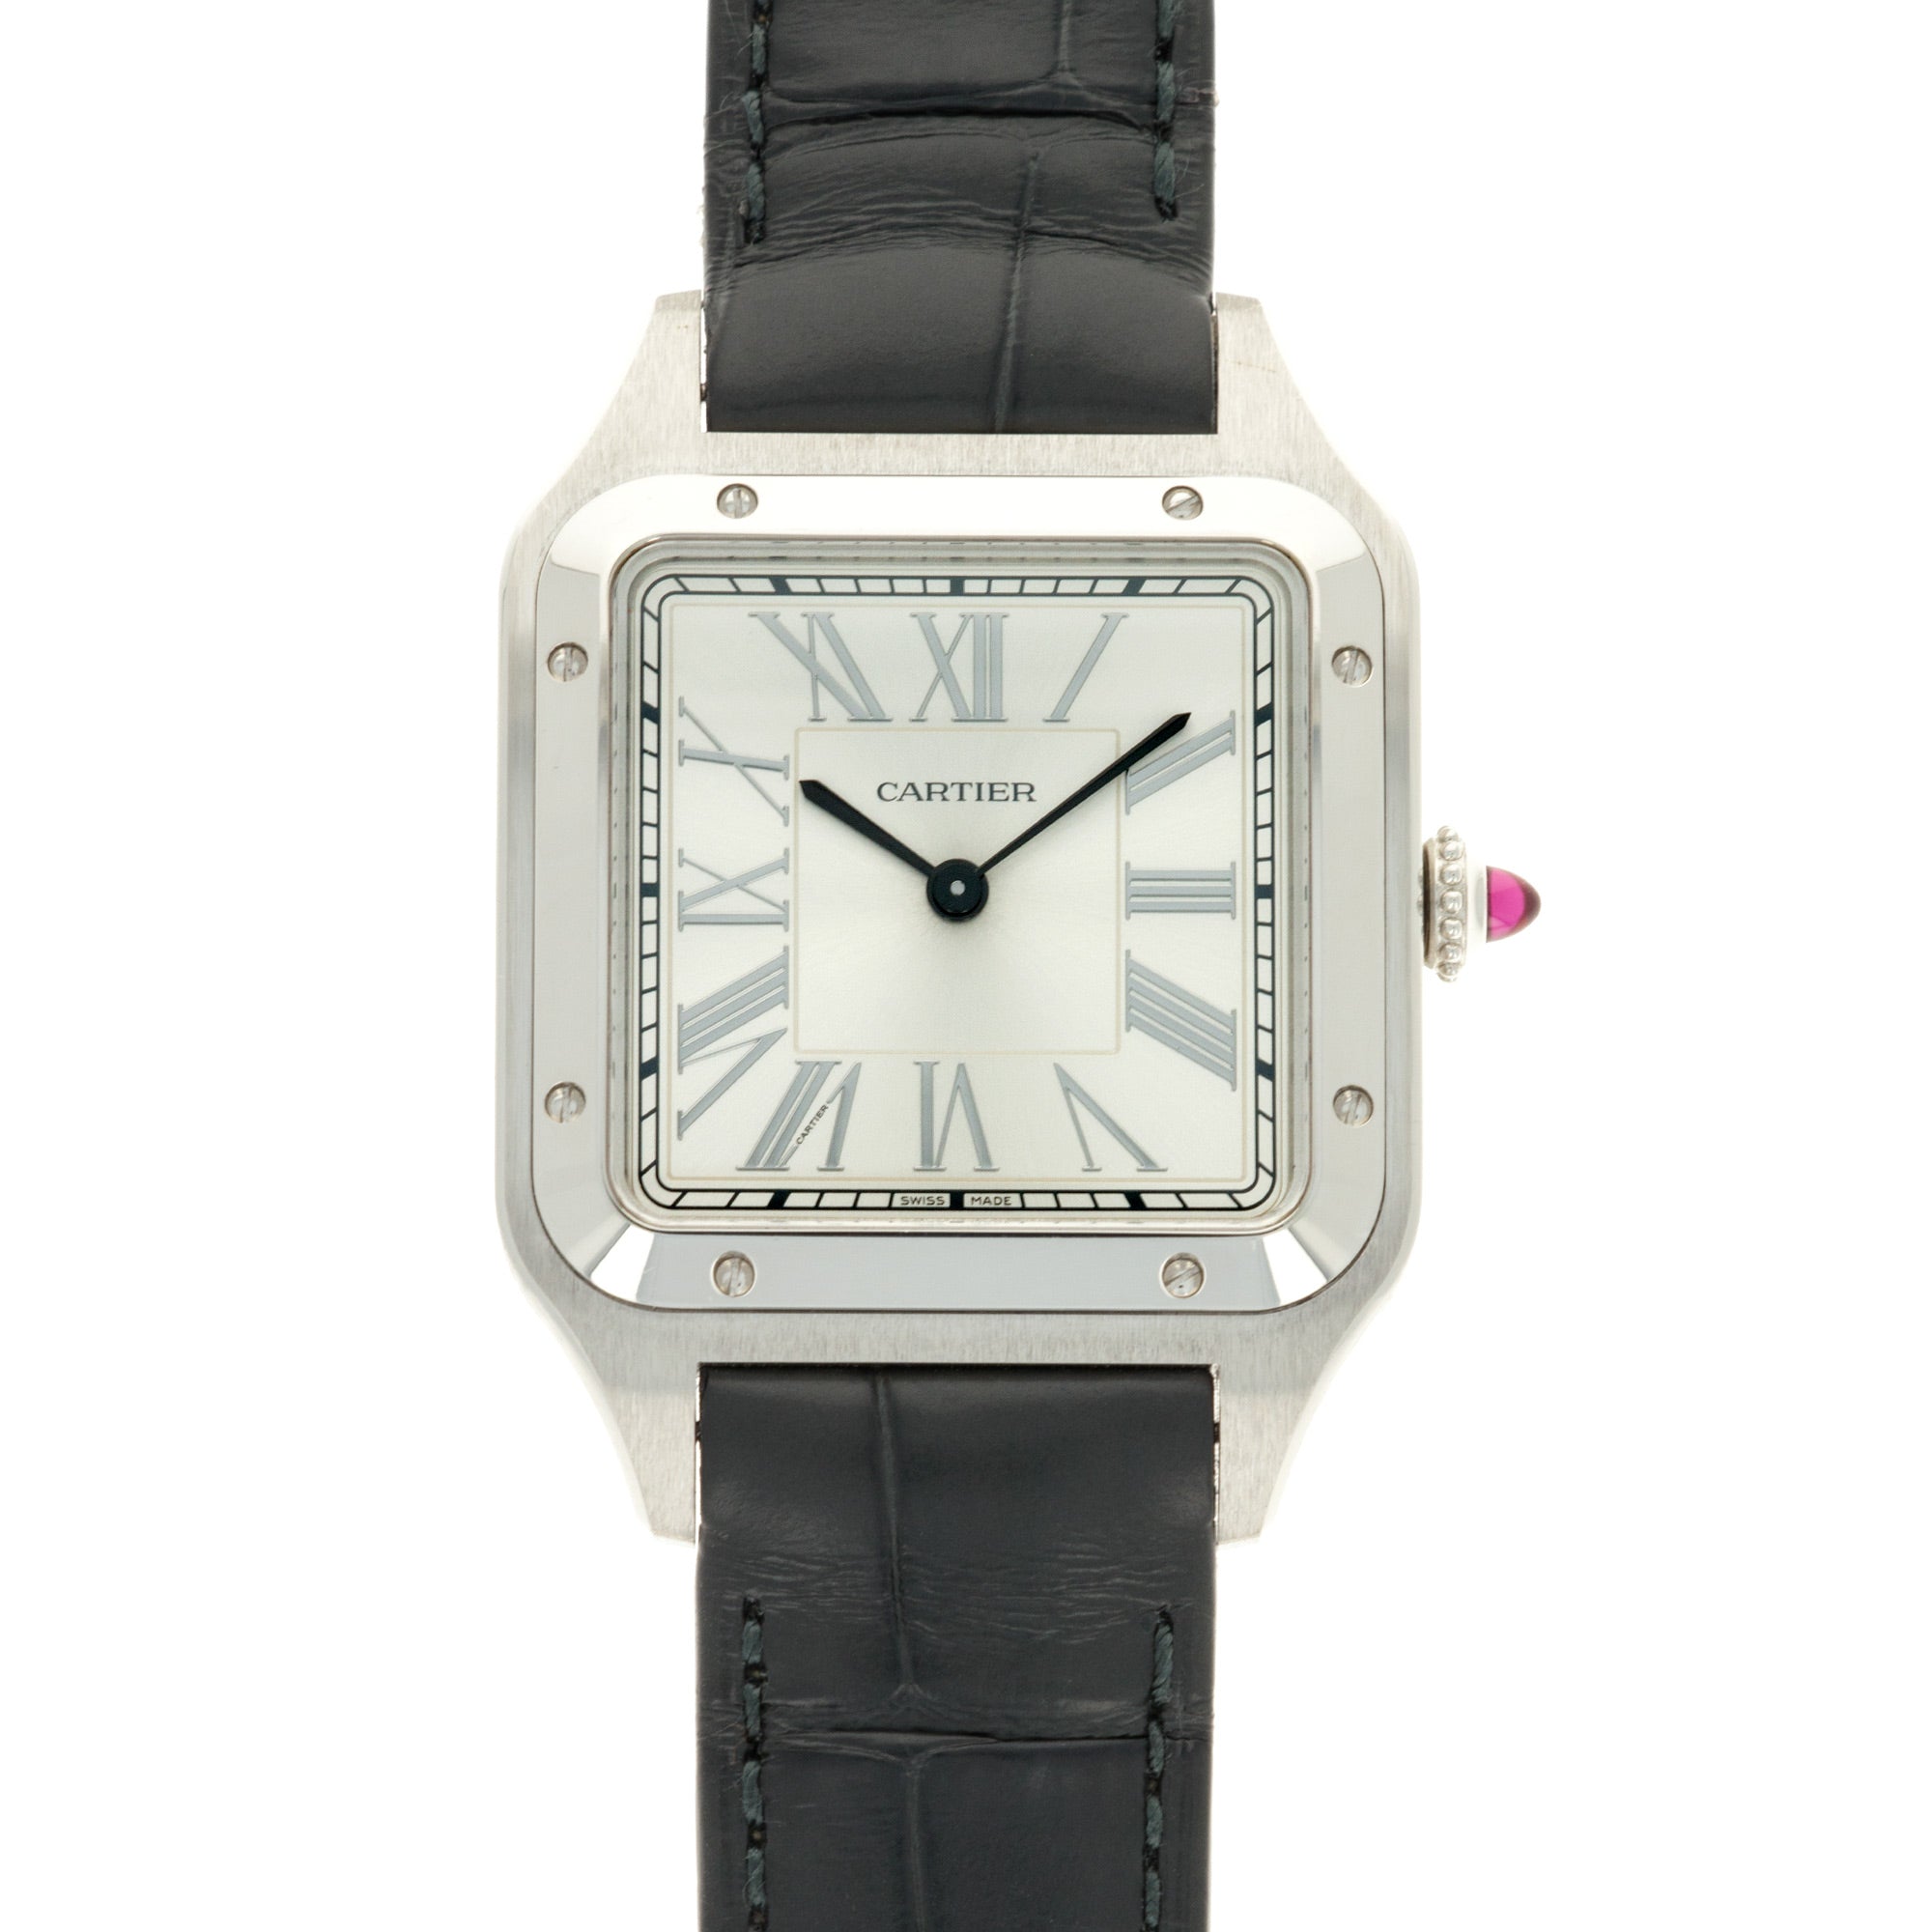 Cartier - Cartier Platinum Santos-Dumont Le Bresil Tank Ref. WGSA0034, Limited Edition of 100 Pieces - The Keystone Watches